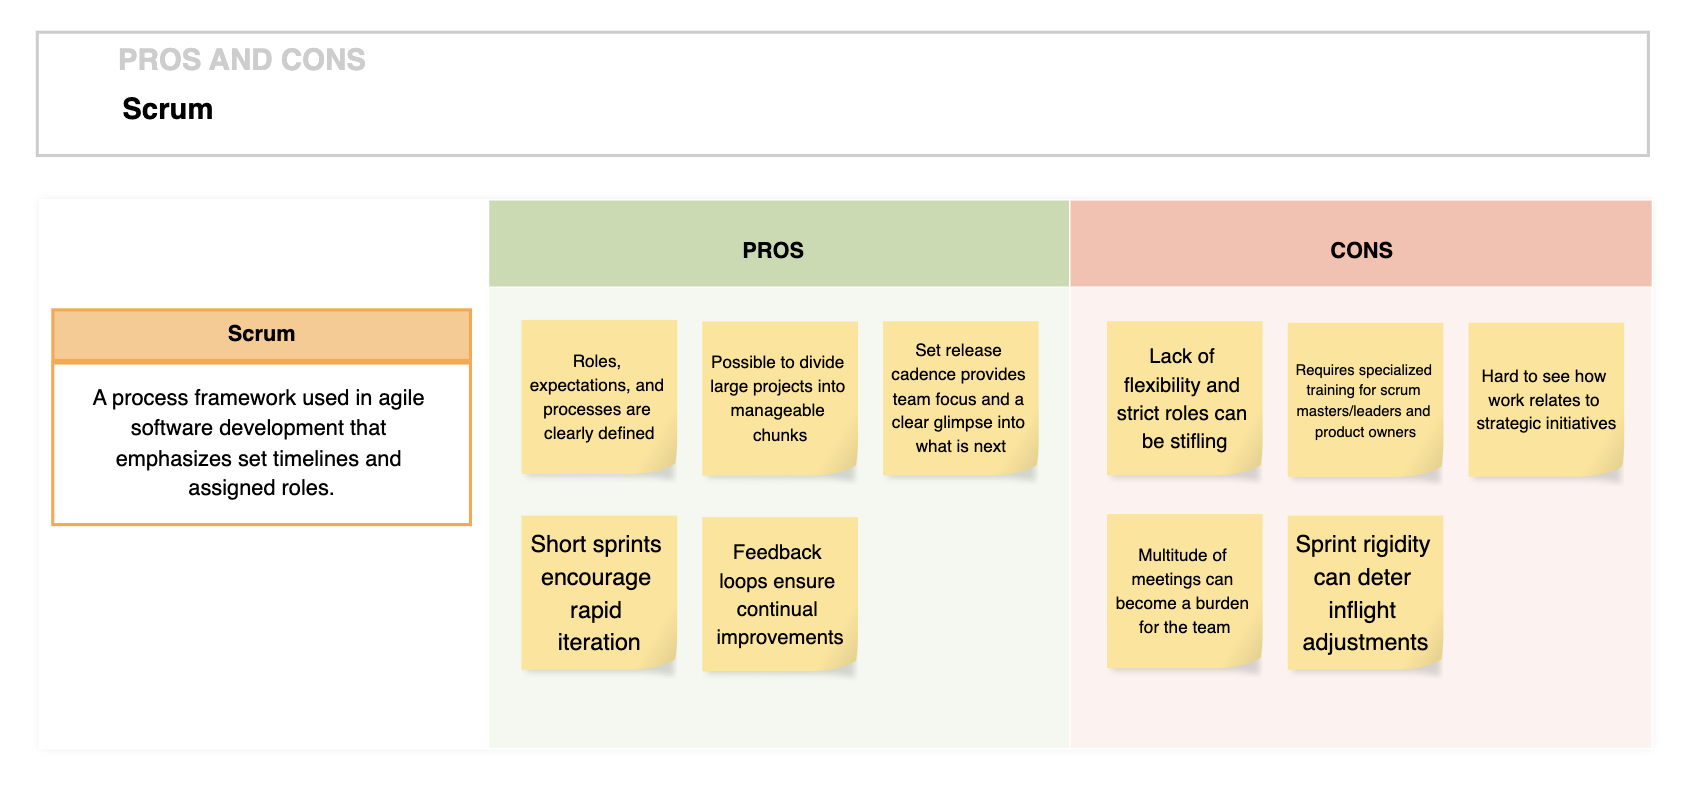 Pros and cons of scrum